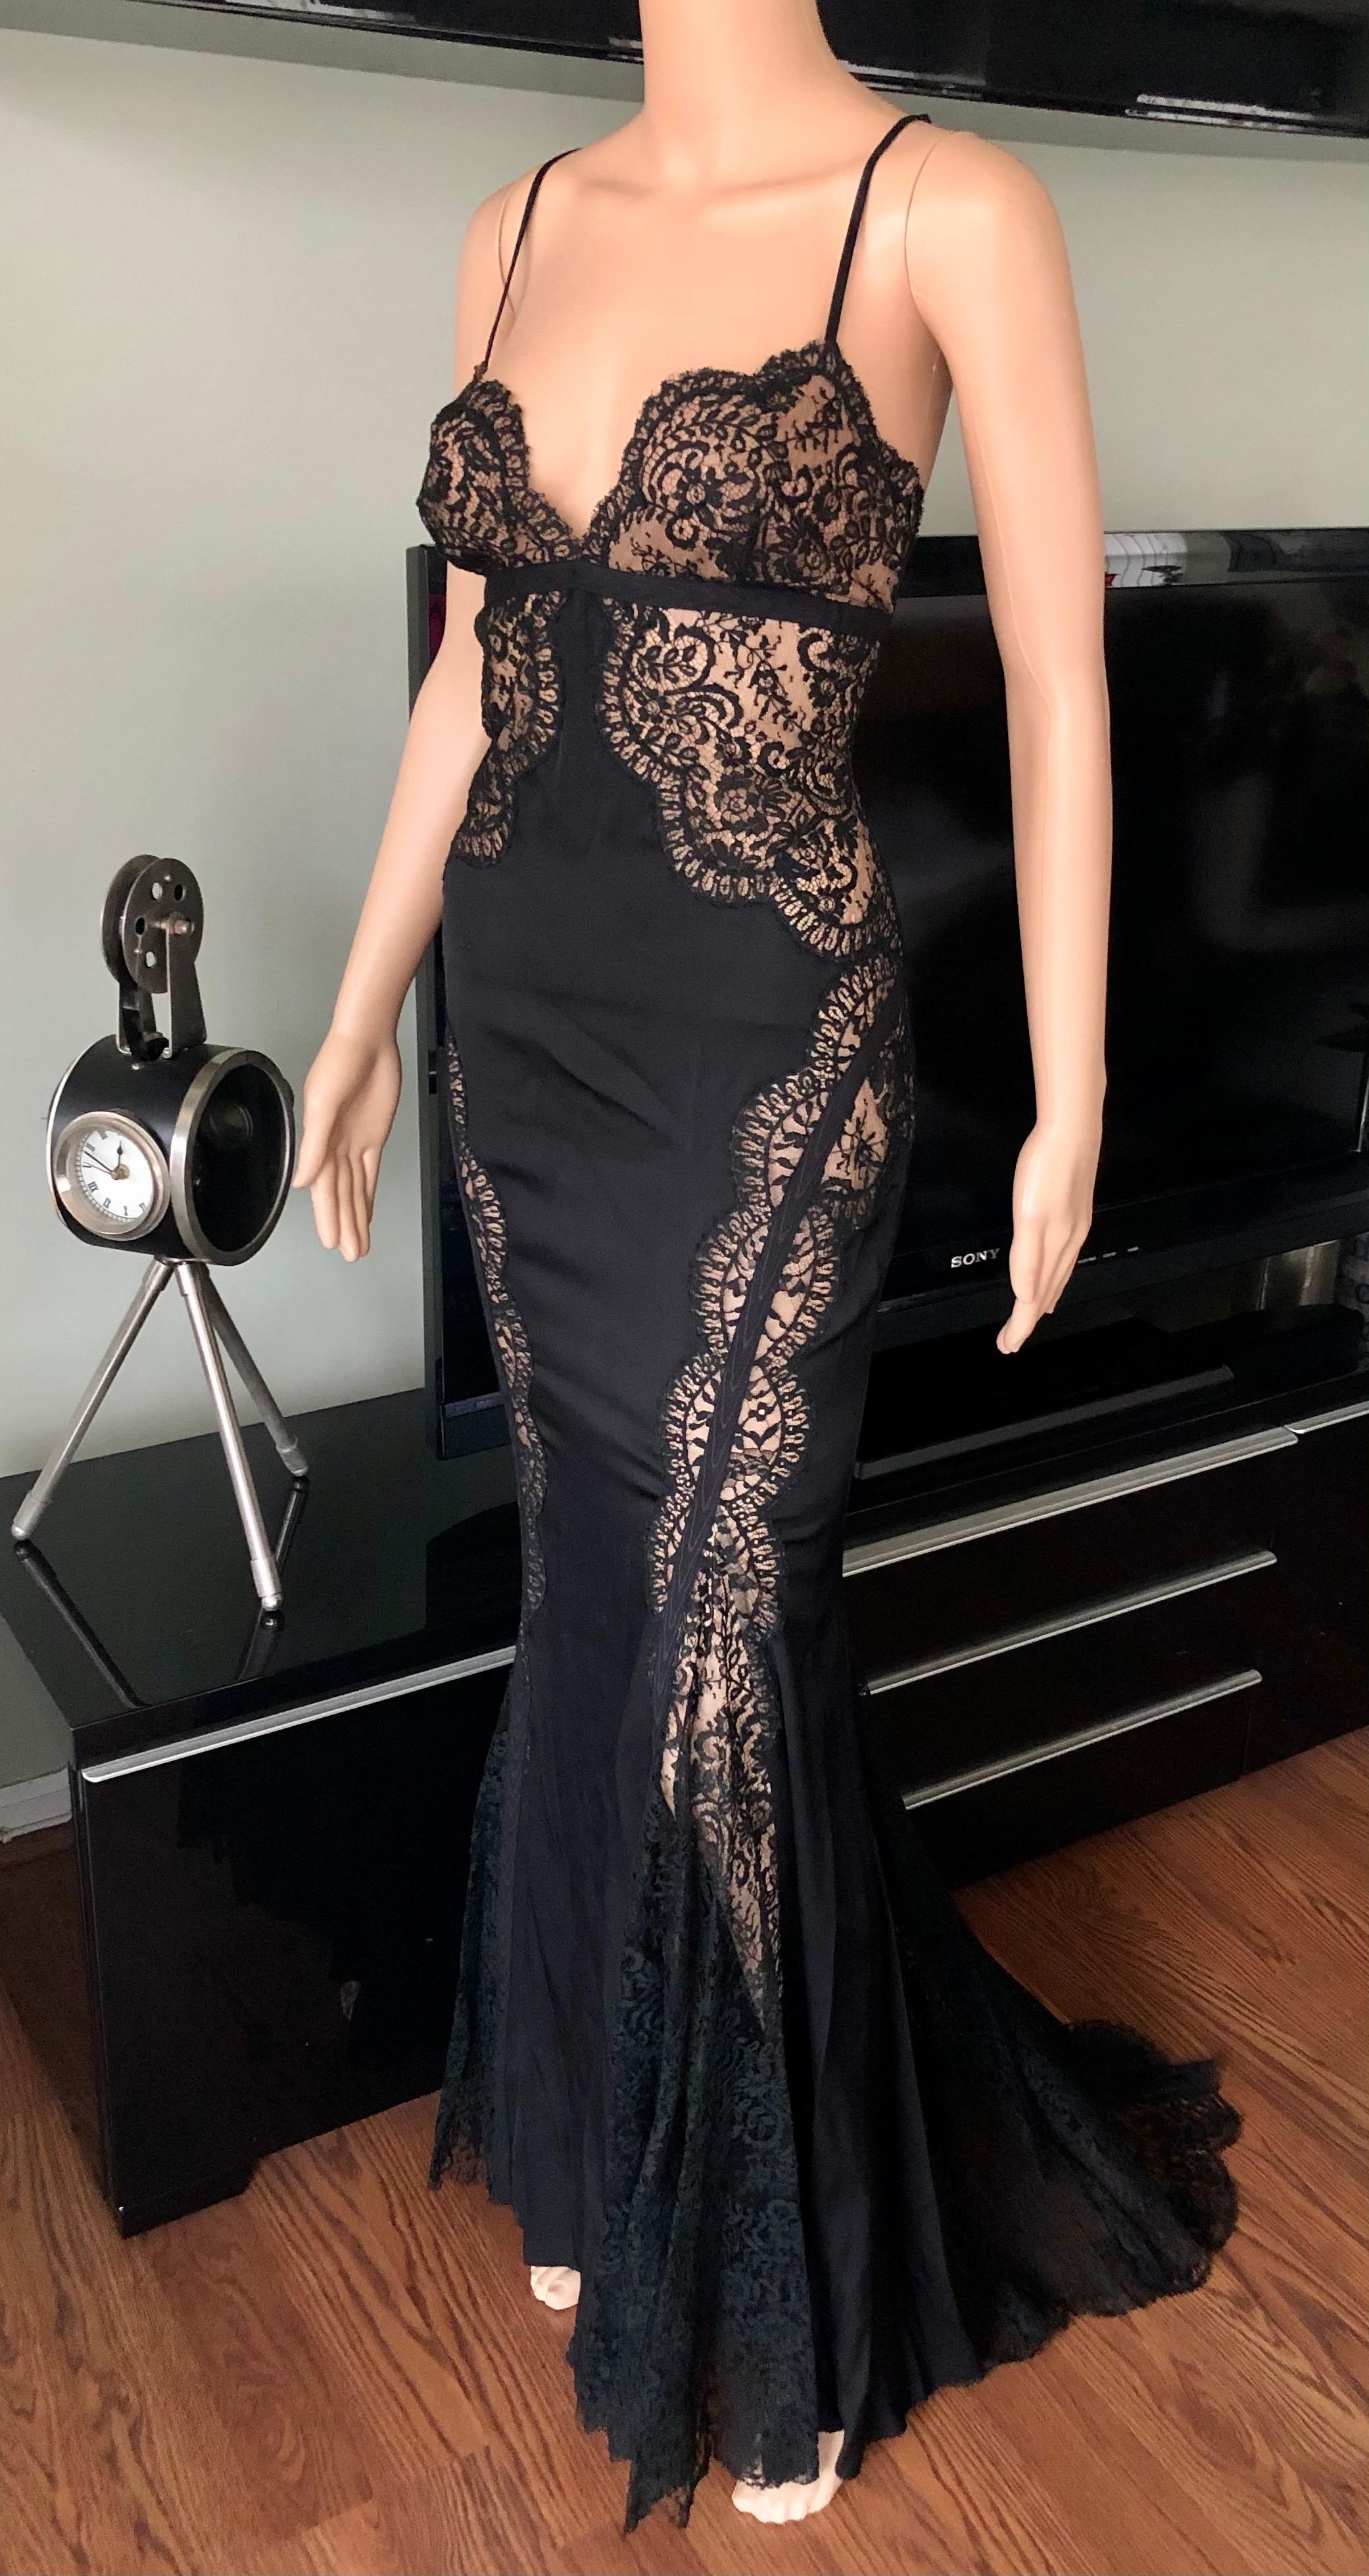 Versace Plunged Sheer Lace Panels Backless Black Evening Dress Gown 

Please note size tag has been removed but this dress will likely fit IT 40

